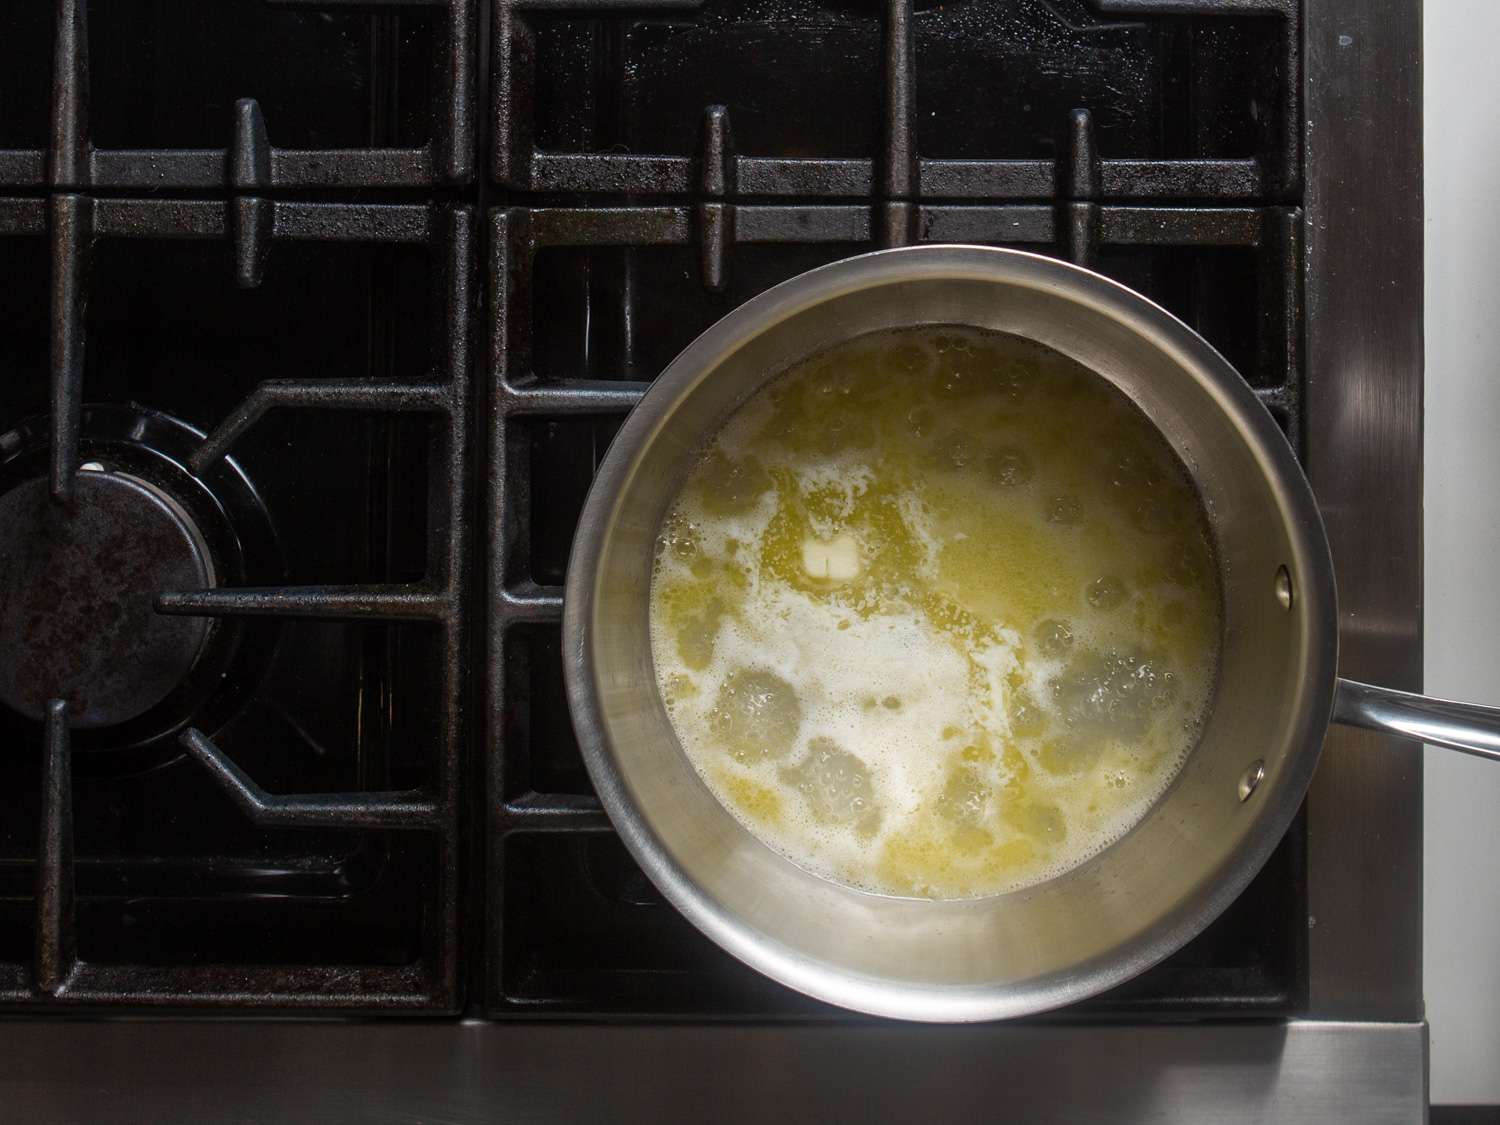 Overhead view of the butter and water simmering on a stovetop.